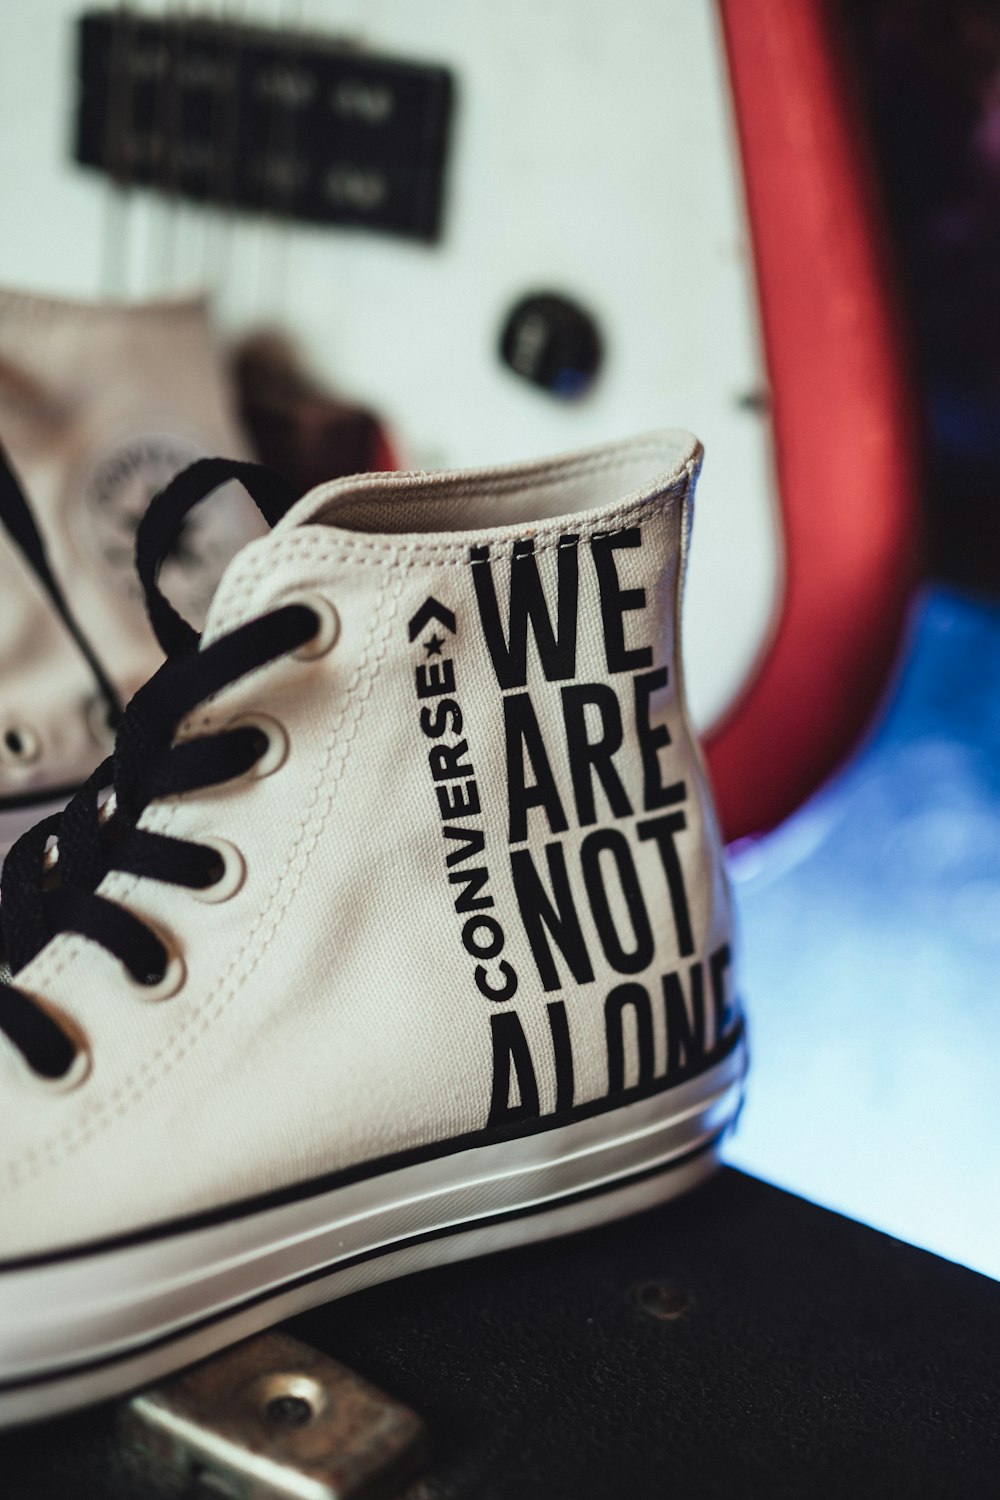 Converse All Star Download Free on